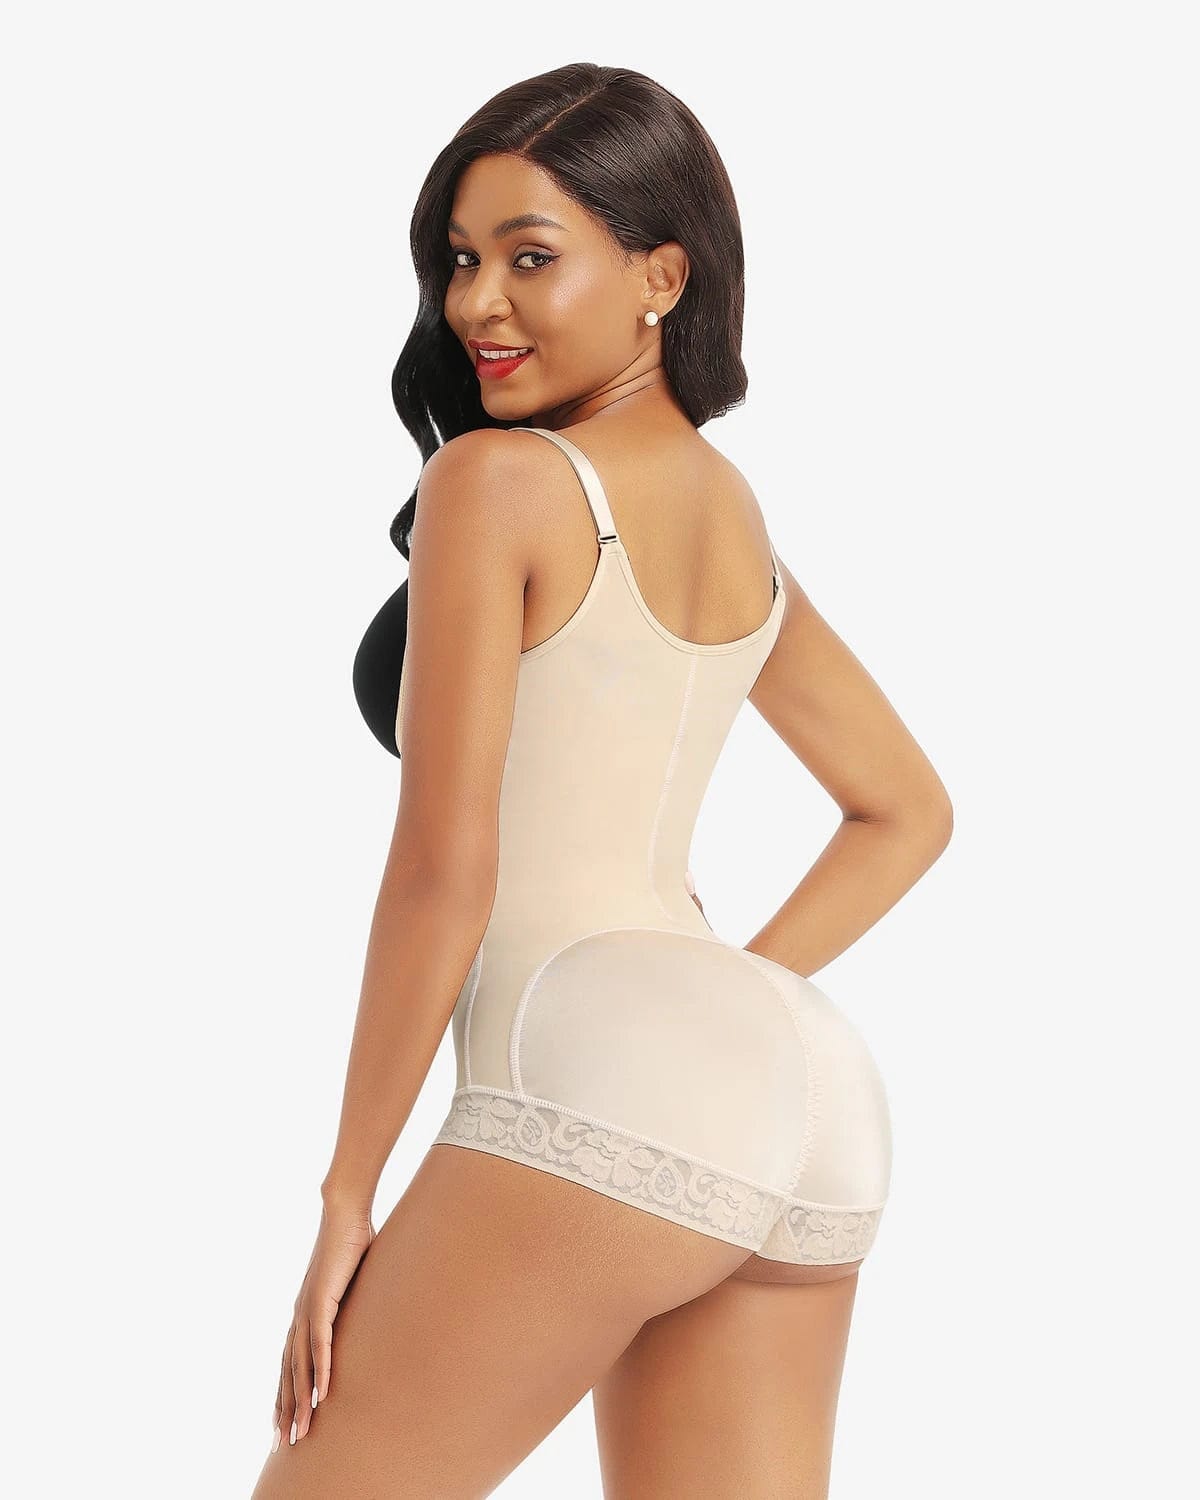 Sexy Lace Bodysuit With Sling Splice For Womens Shaping And Sculpting Lace Shapewear  Bodysuit Girl236Z From Qbilp, $23.82